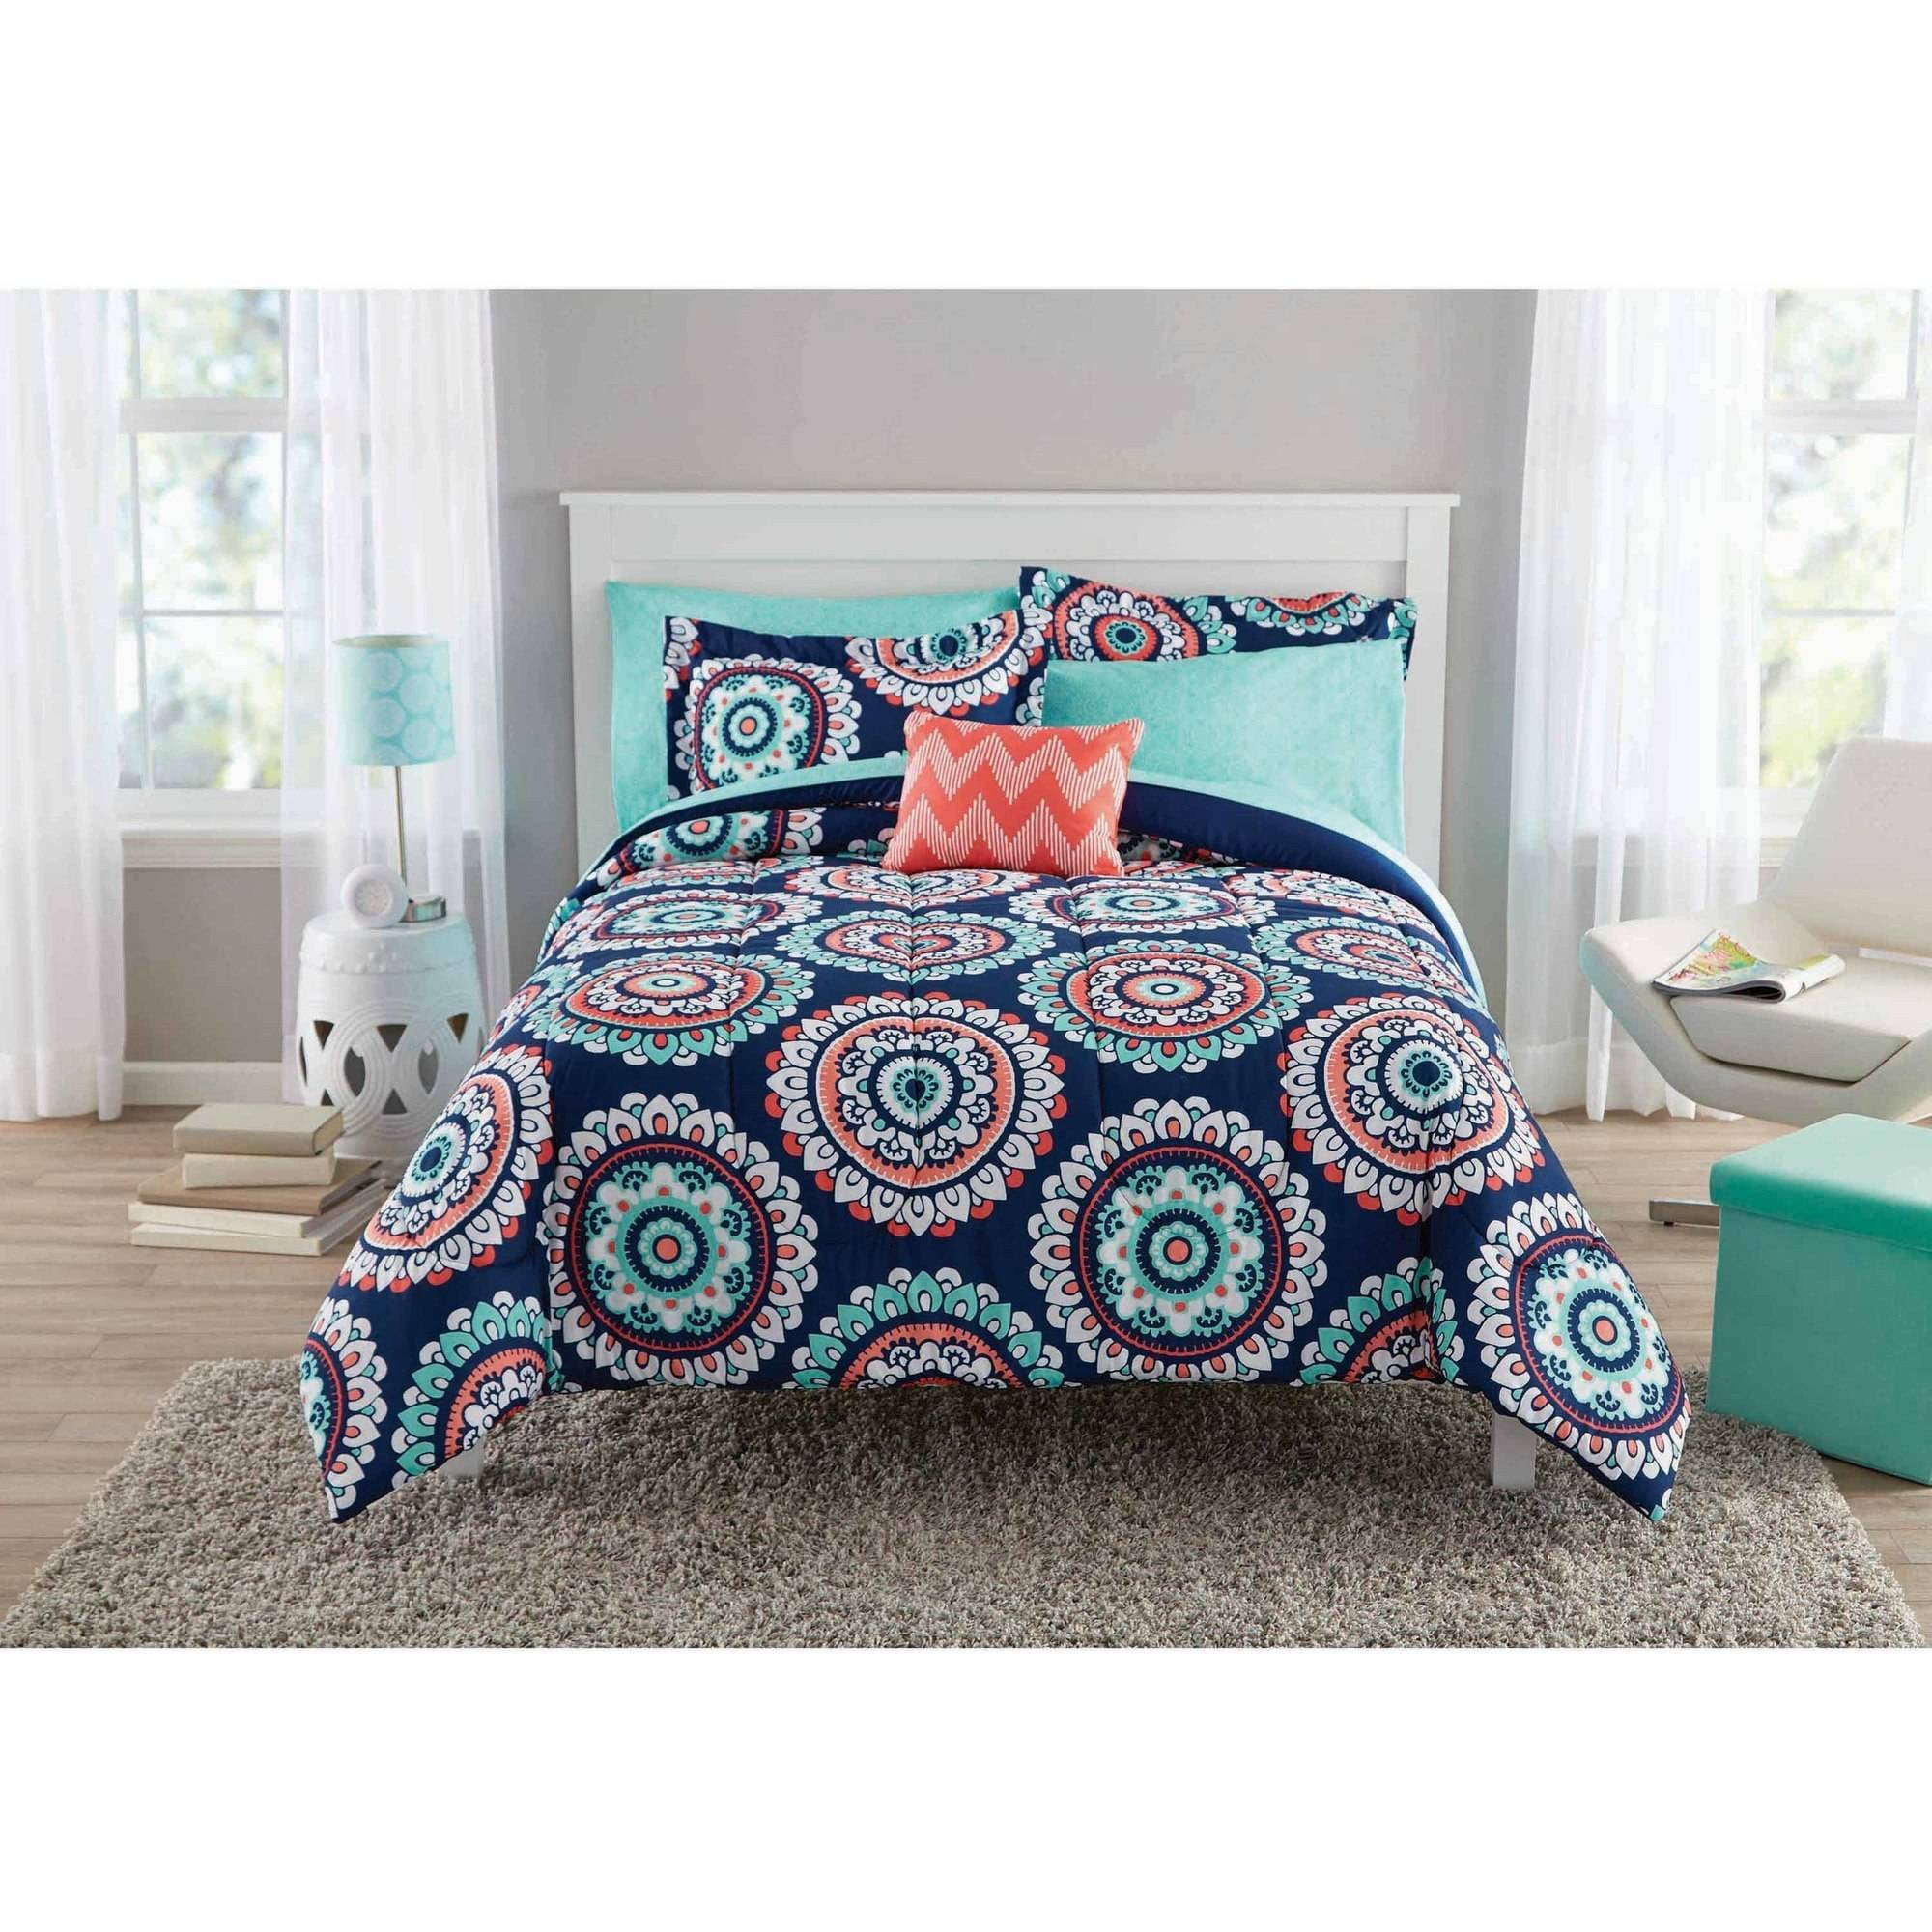 Details about   Teal Medallion 8 Piece Bed Set with Sheets and Decor Pillow Queen